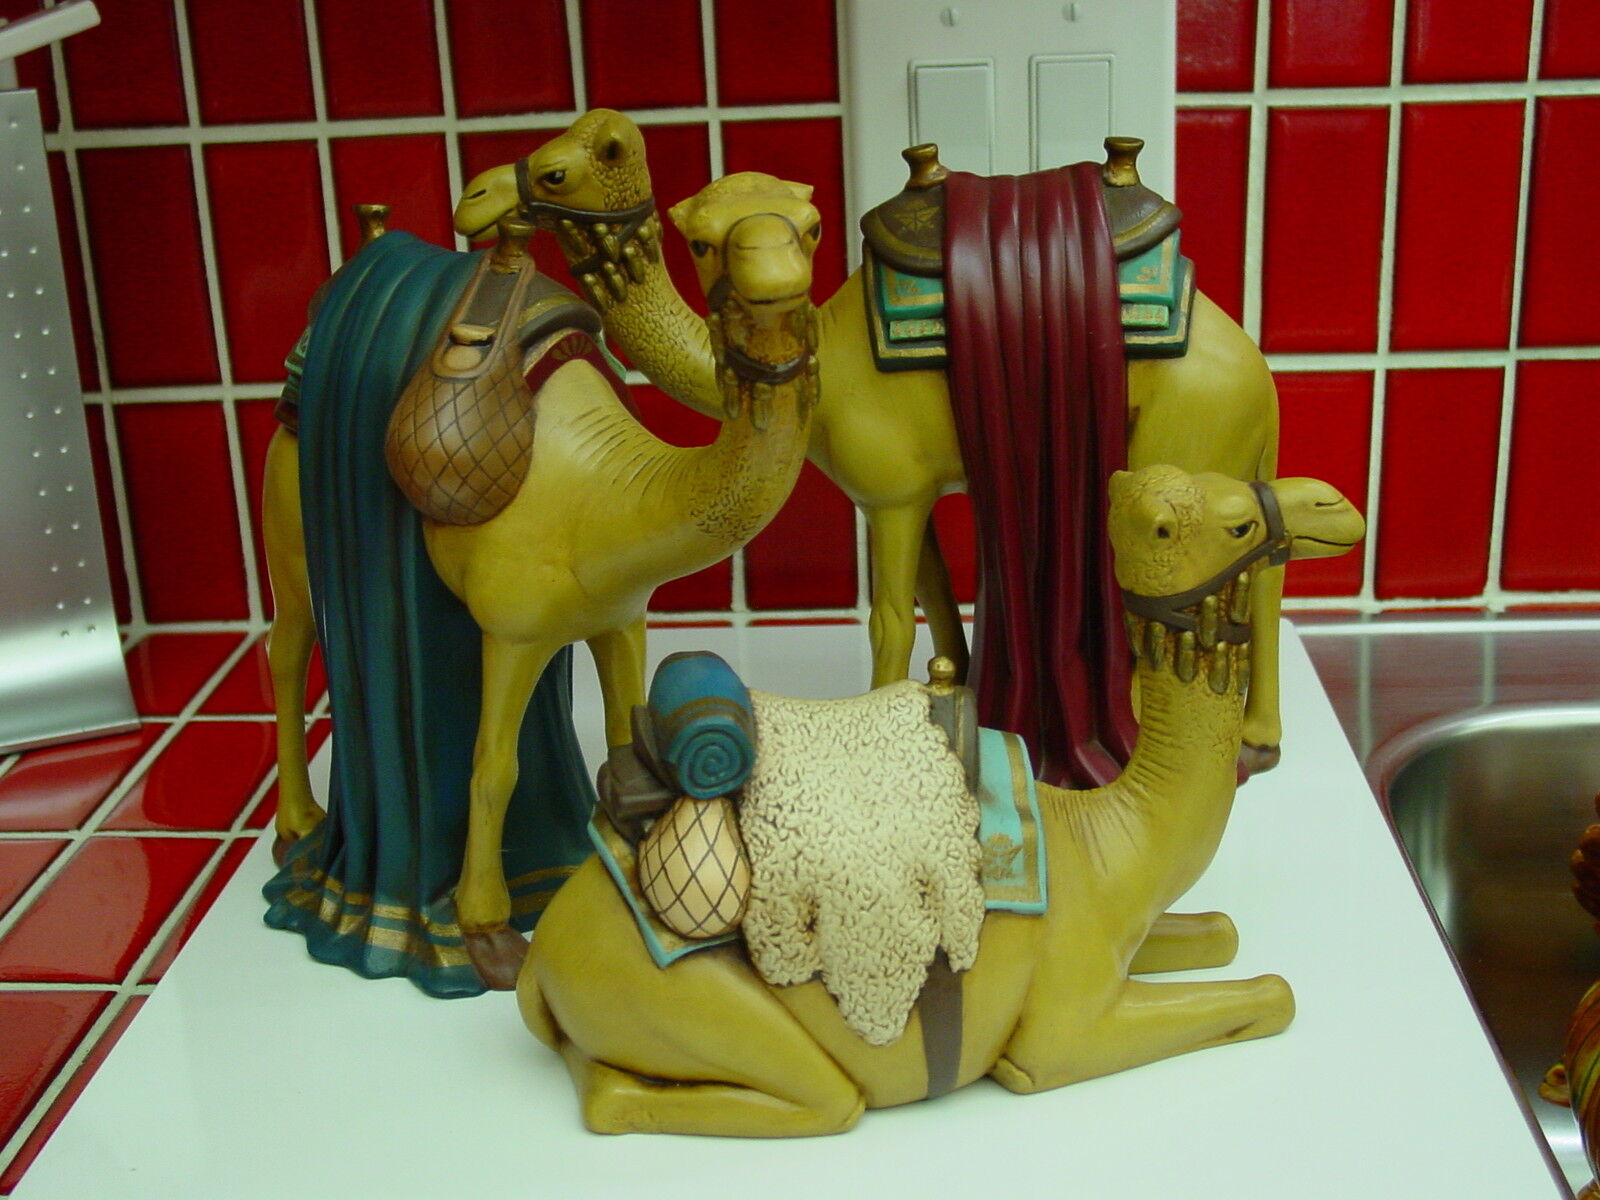 Set of 3 beautifully detailed, hand-painted ceramic camels